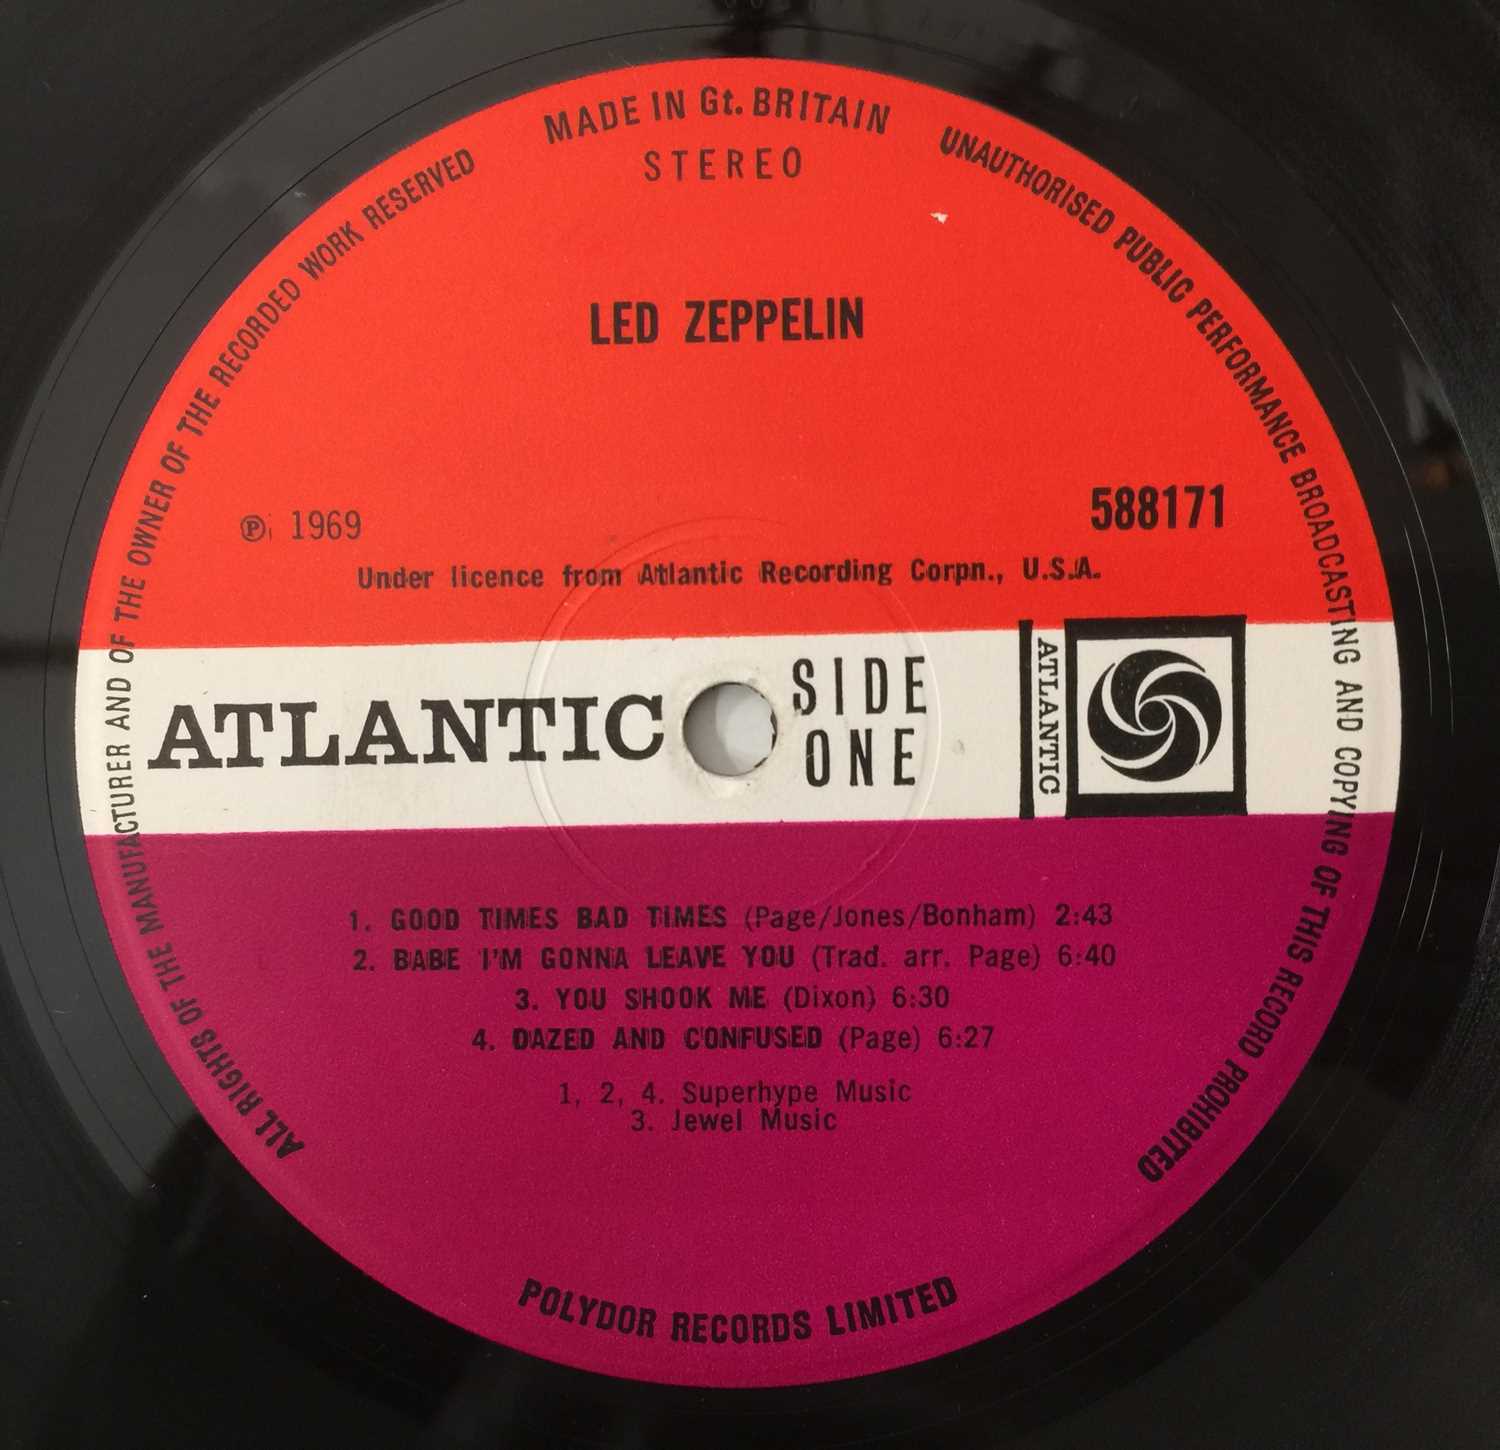 LED ZEPPELIN - 'I' LP (FIRST UK 'TURQUOISE' COPY - ATLANTIC 588171 - UNCORRECTED 8s) - Image 4 of 5